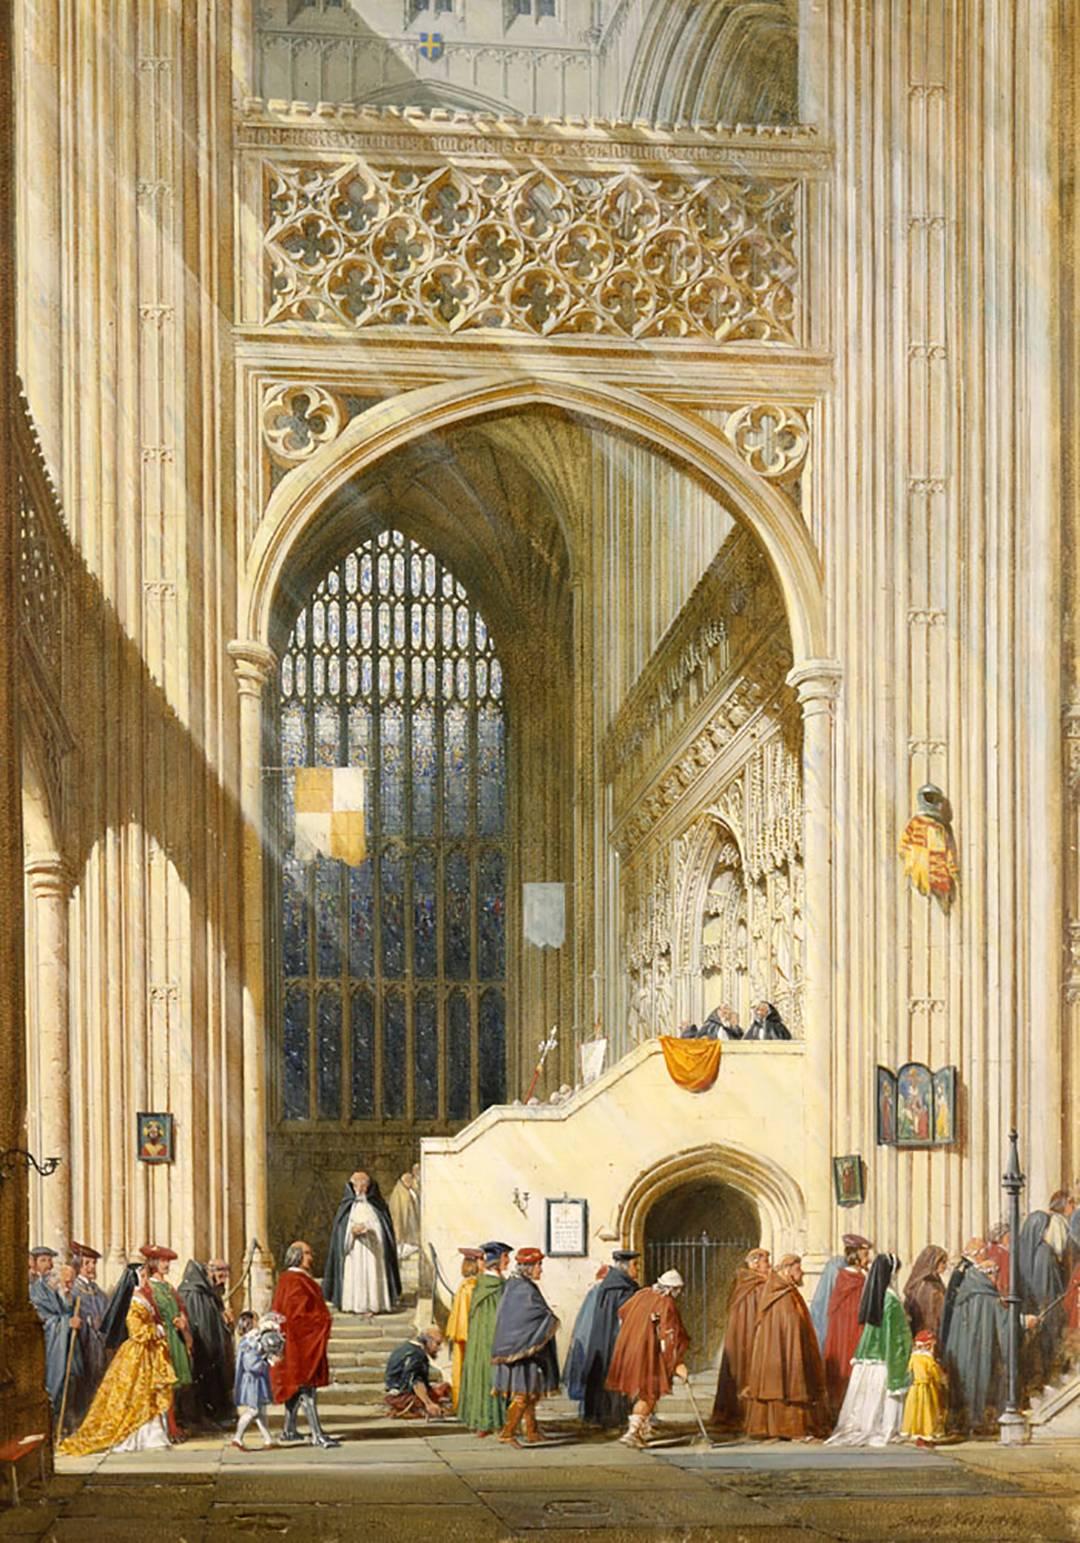 Impressive Large Antique Watercolor Painting by renowned very well listed English artist Joseph Nash (English, 1808-1878), Entitled “Pilgrims, Canterbury Cathedral”  Watercolor on Paper  Painting is signed and dated “1858” by the artist in lower